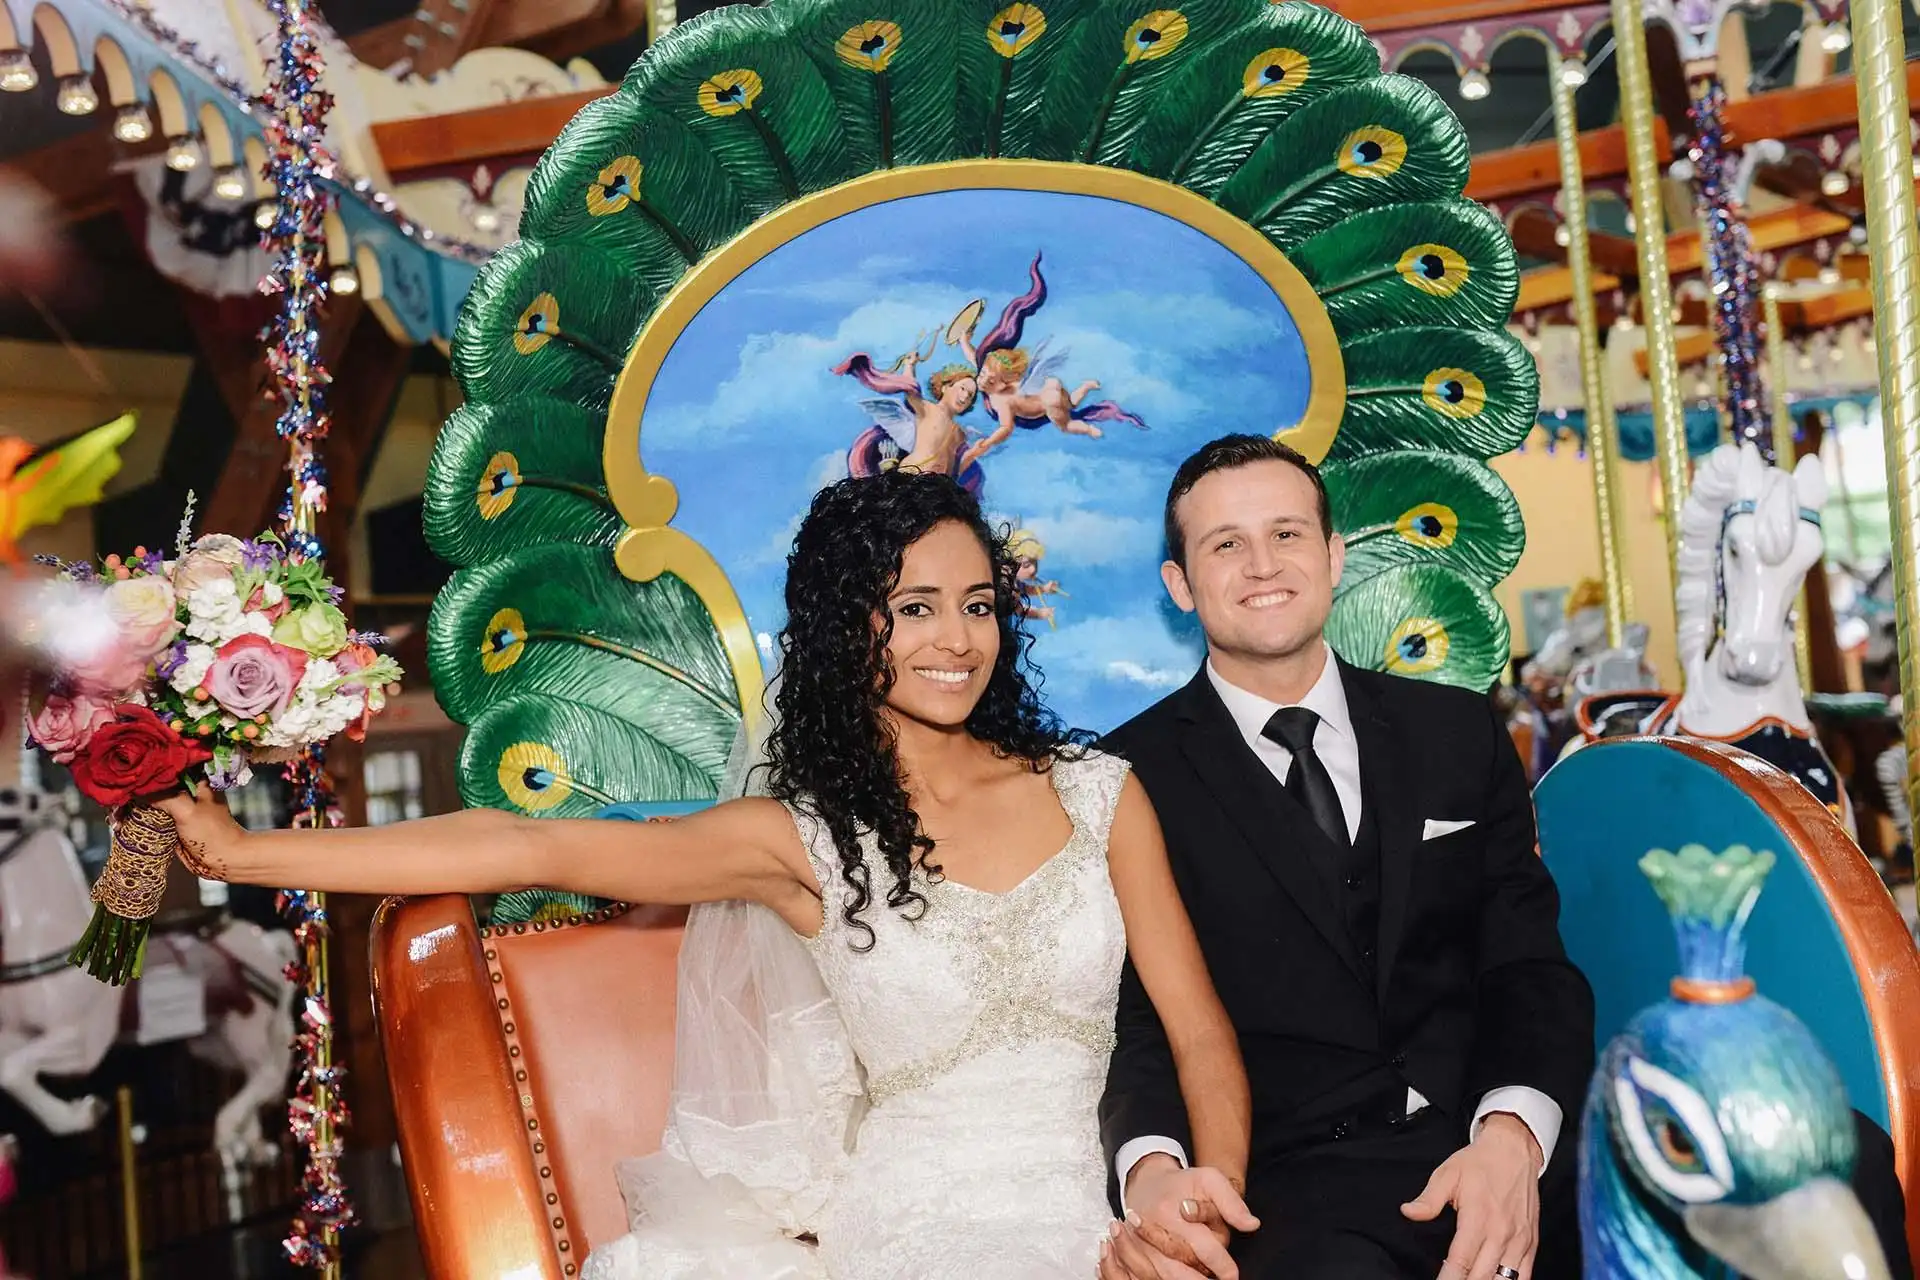 Bride and groom riding on a chariot on the carousel.